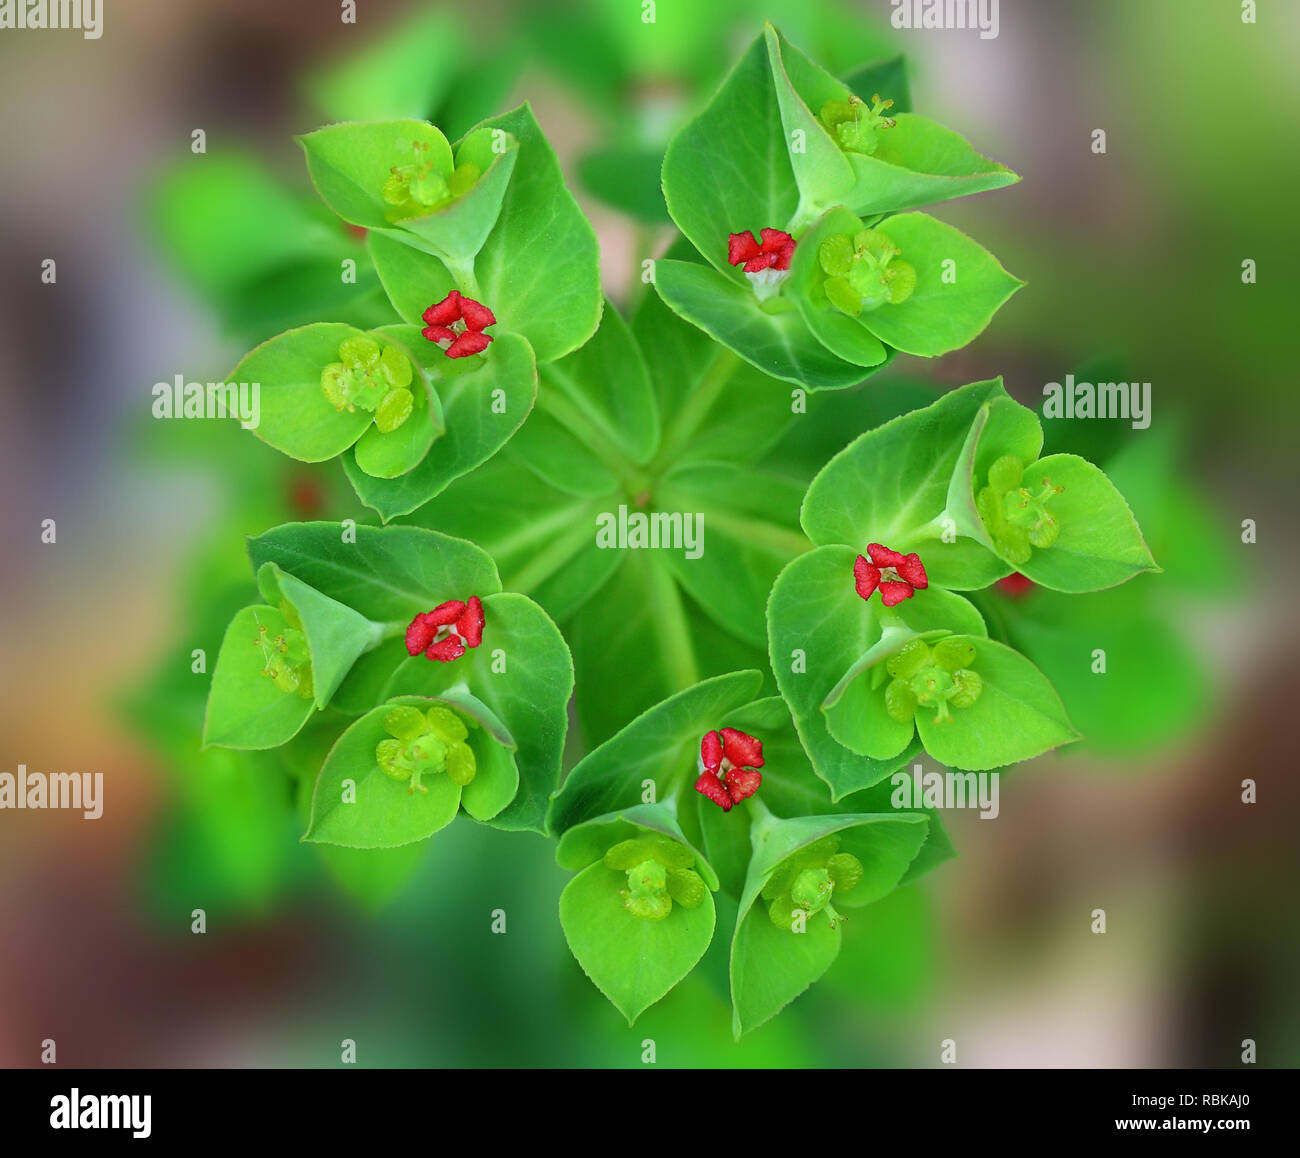 Symmetric pentagon-shaped plant with red flowers Stock Photo